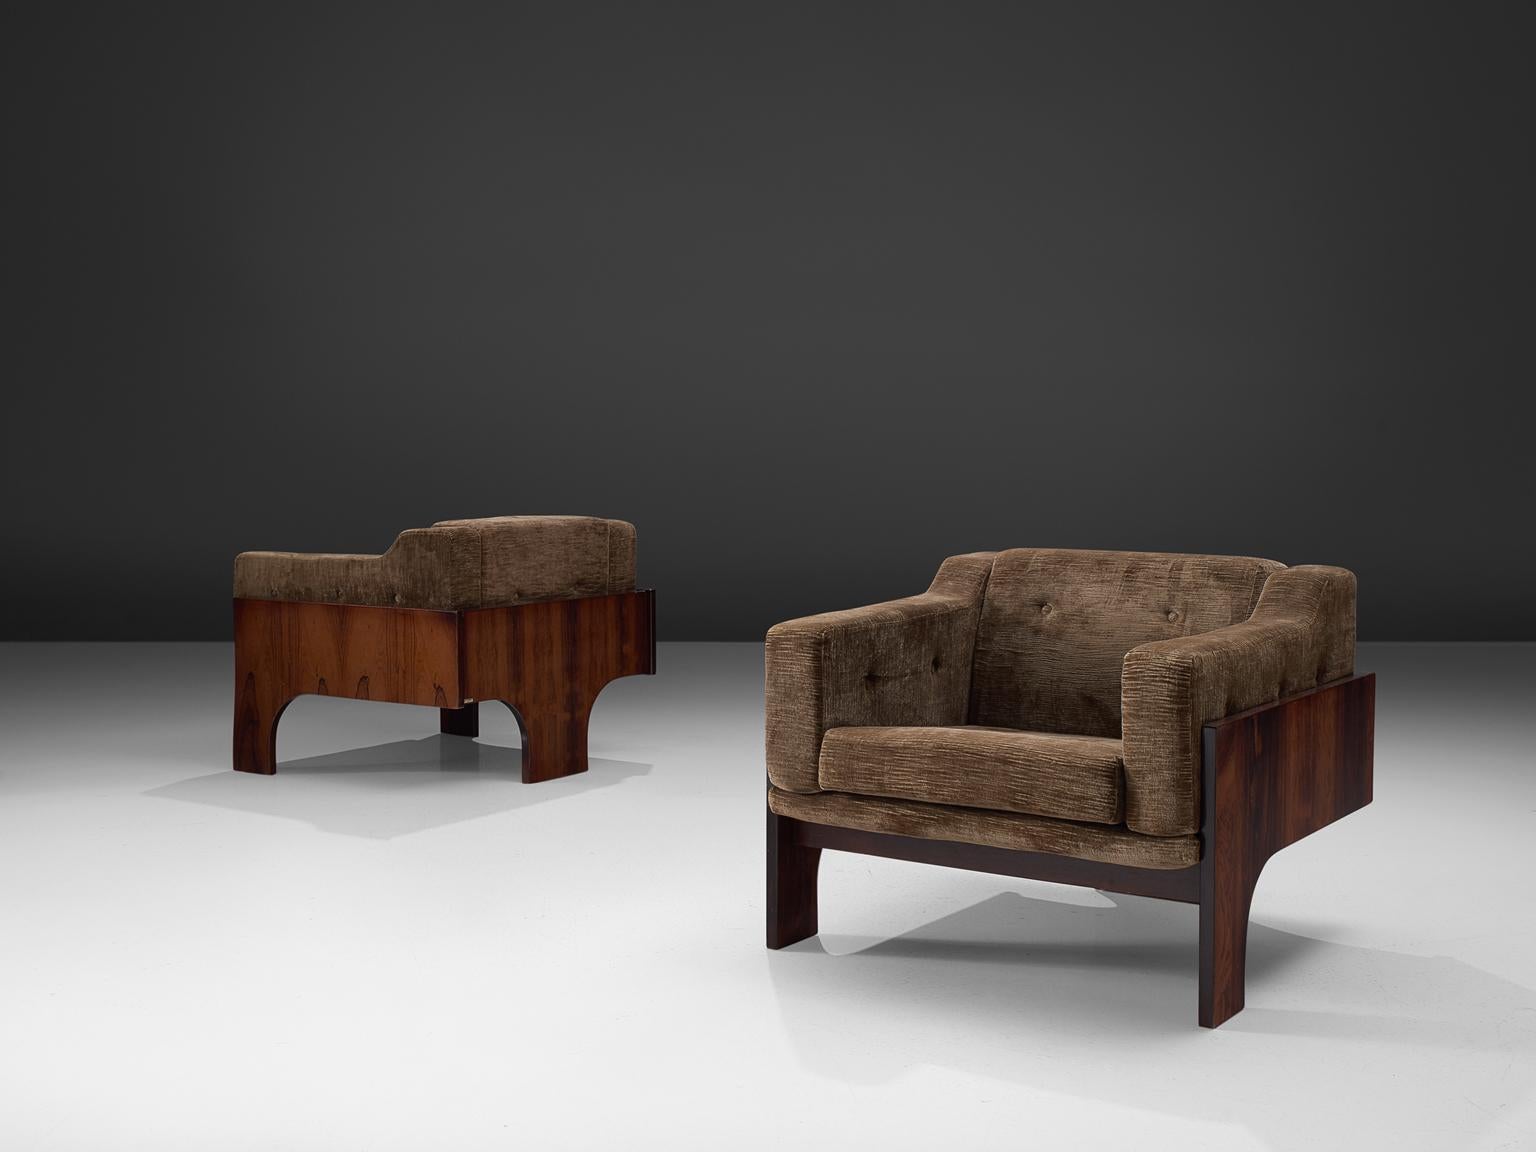 Claudio Salocchi for Sormani, set of 2 'Oriolo' lounge chairs, rosewood and fabric Italy, 1966

The ‘T-shaped wooden frame’ holds an elegant leather detail on the back of each chair. The armchair features a tripod, T-shaped frame made of rosewood.